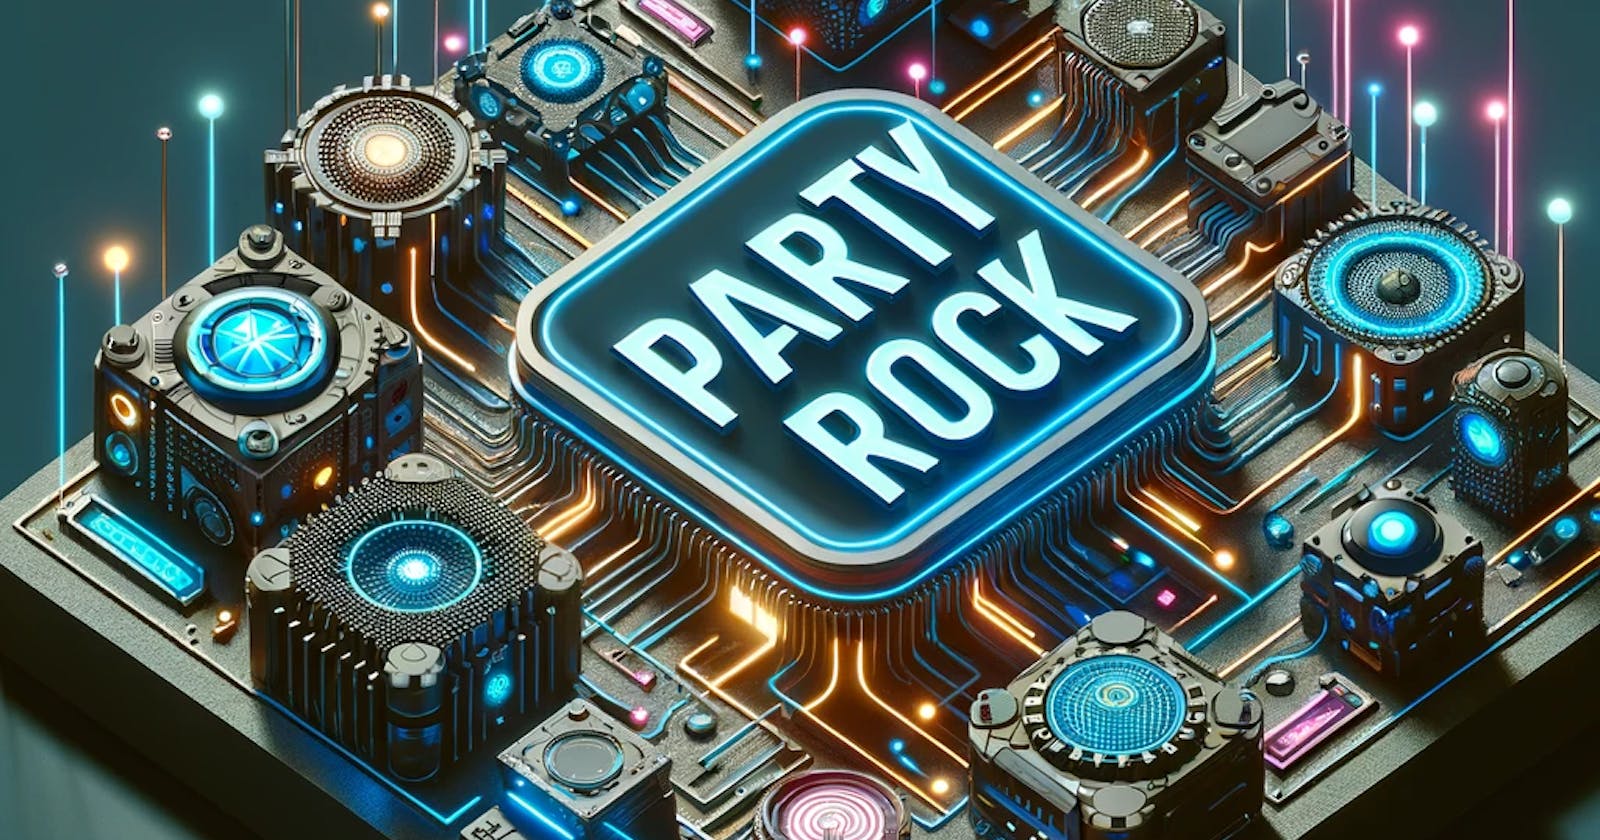 Have Fun with AWS PartyRock